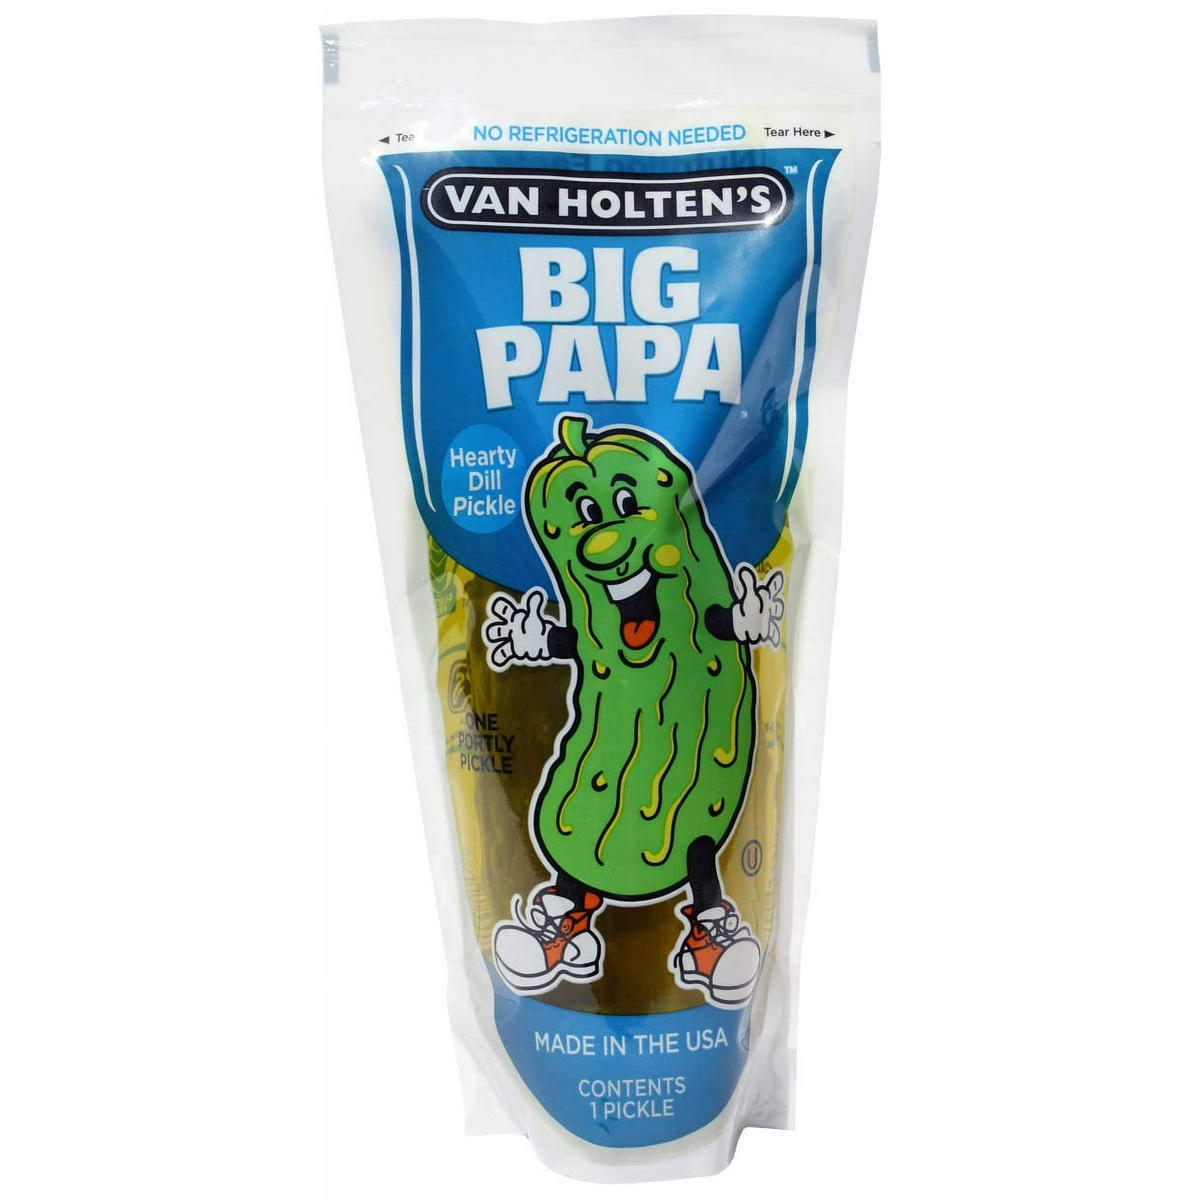 Van Holten's Big Papa Hearty Dill Pickle 1 pc